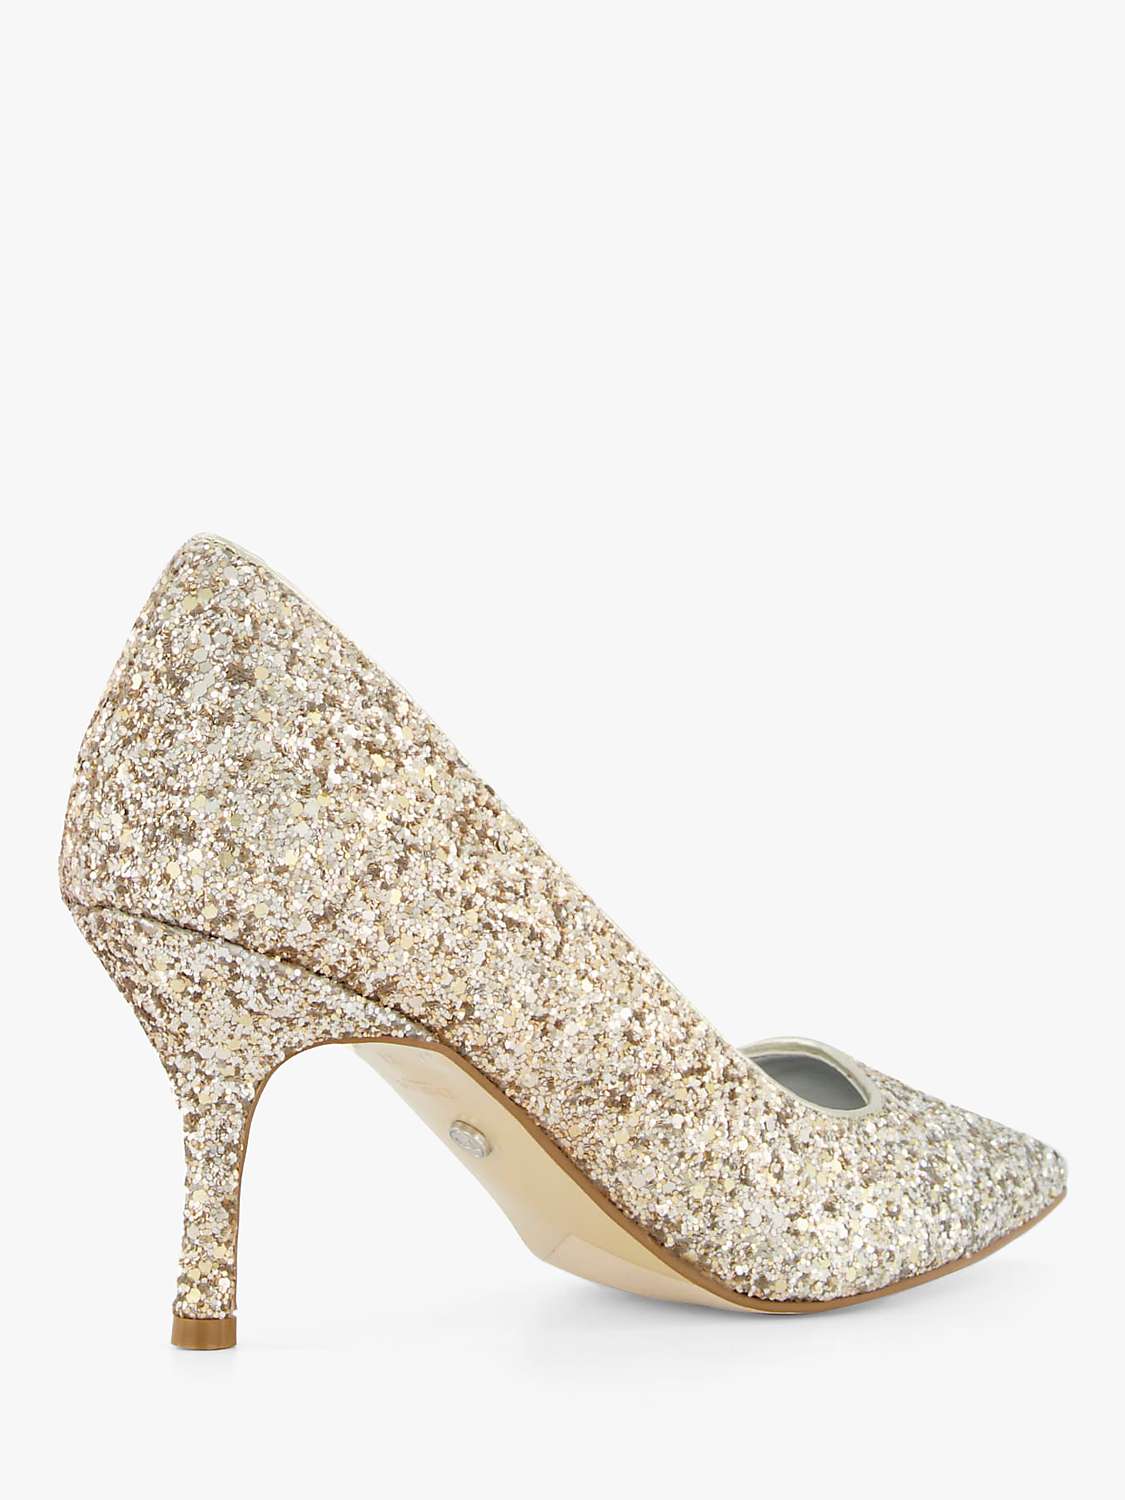 Buy Dune Bedazzling T Pointed Toe Court Shoes, Champagne Online at johnlewis.com